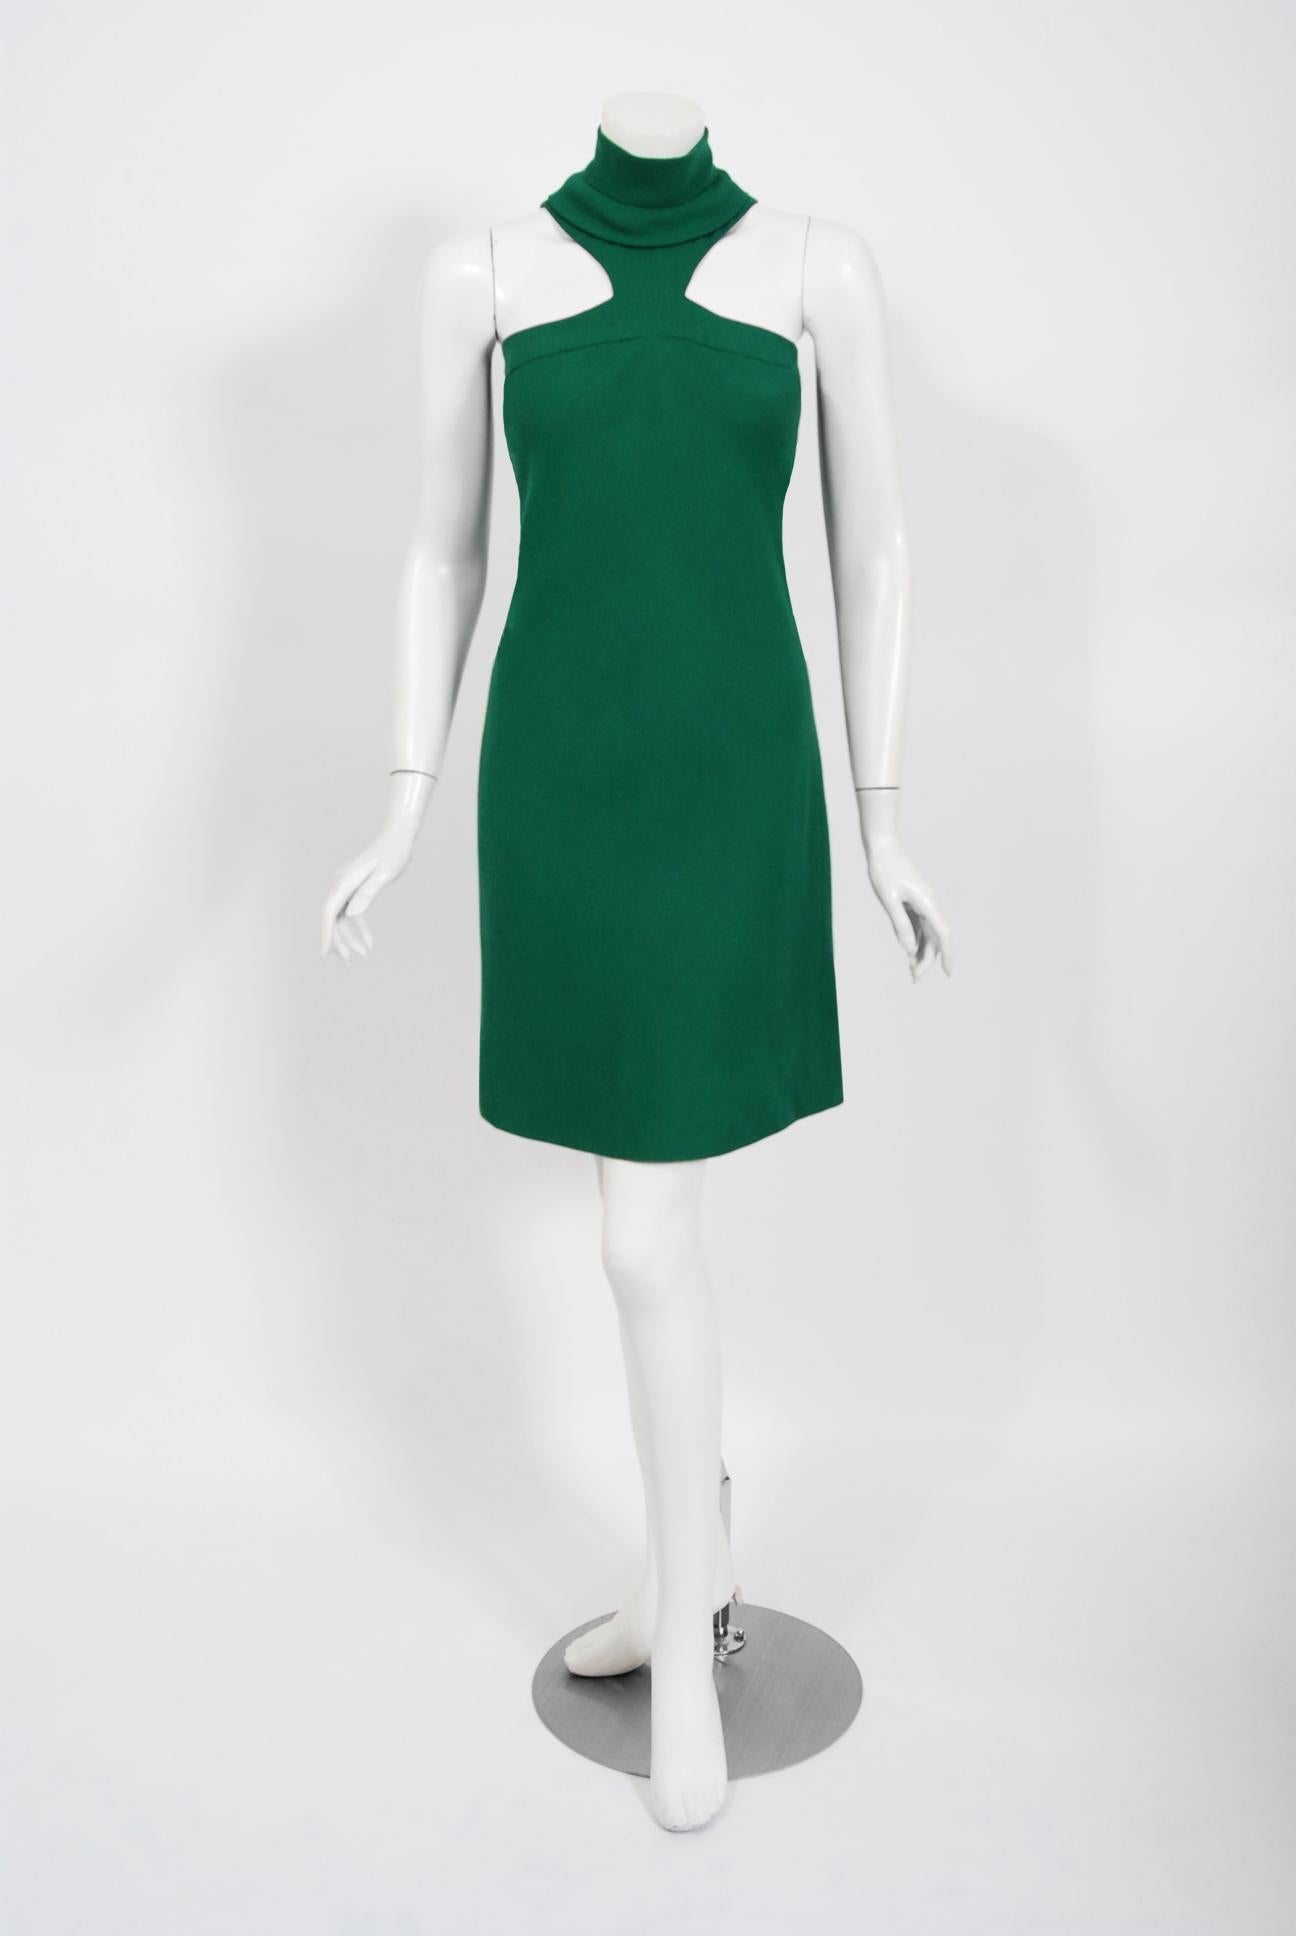 Spectacular Pierre Cardin haute couture designer dress dating back to his 1966 fall-winter collection. In 1951 Cardin opened his own couture house and by 1957, he started a ready-to-wear line; a bold move for a French couturier at the time. The look